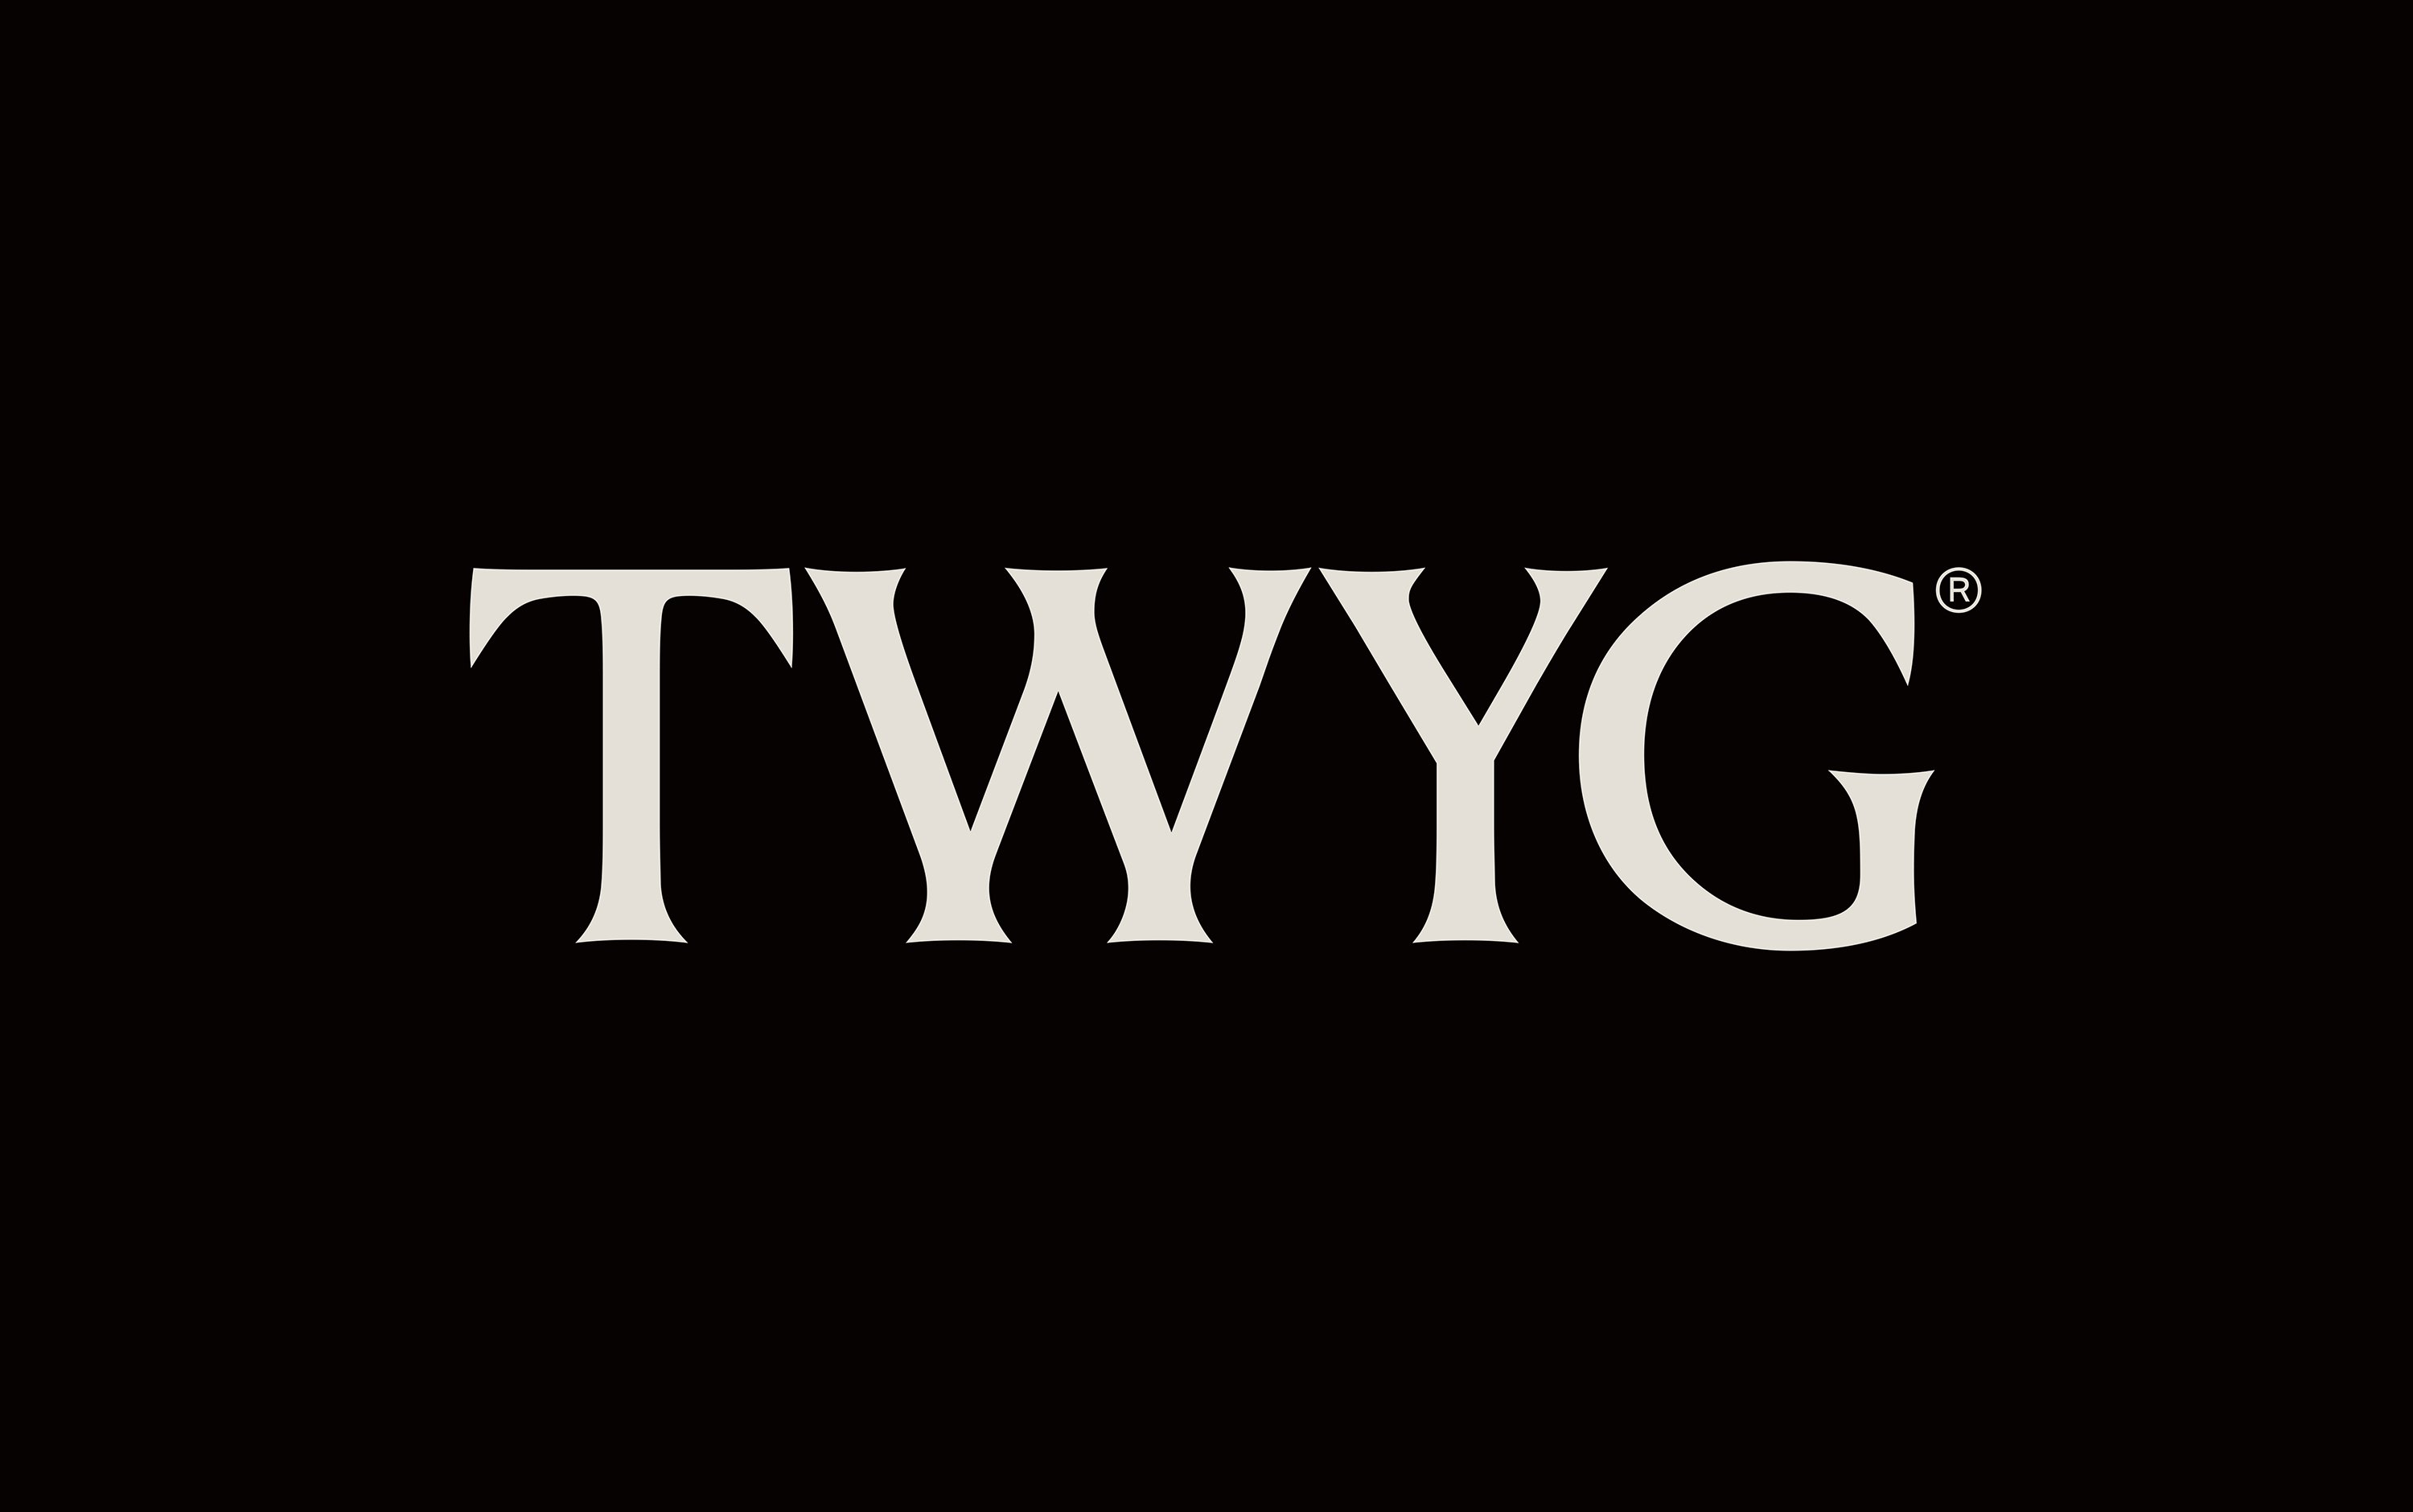 New logotype, packaging and art direction for New Zealand luxury skincare brand TWYG designed by Seachange.